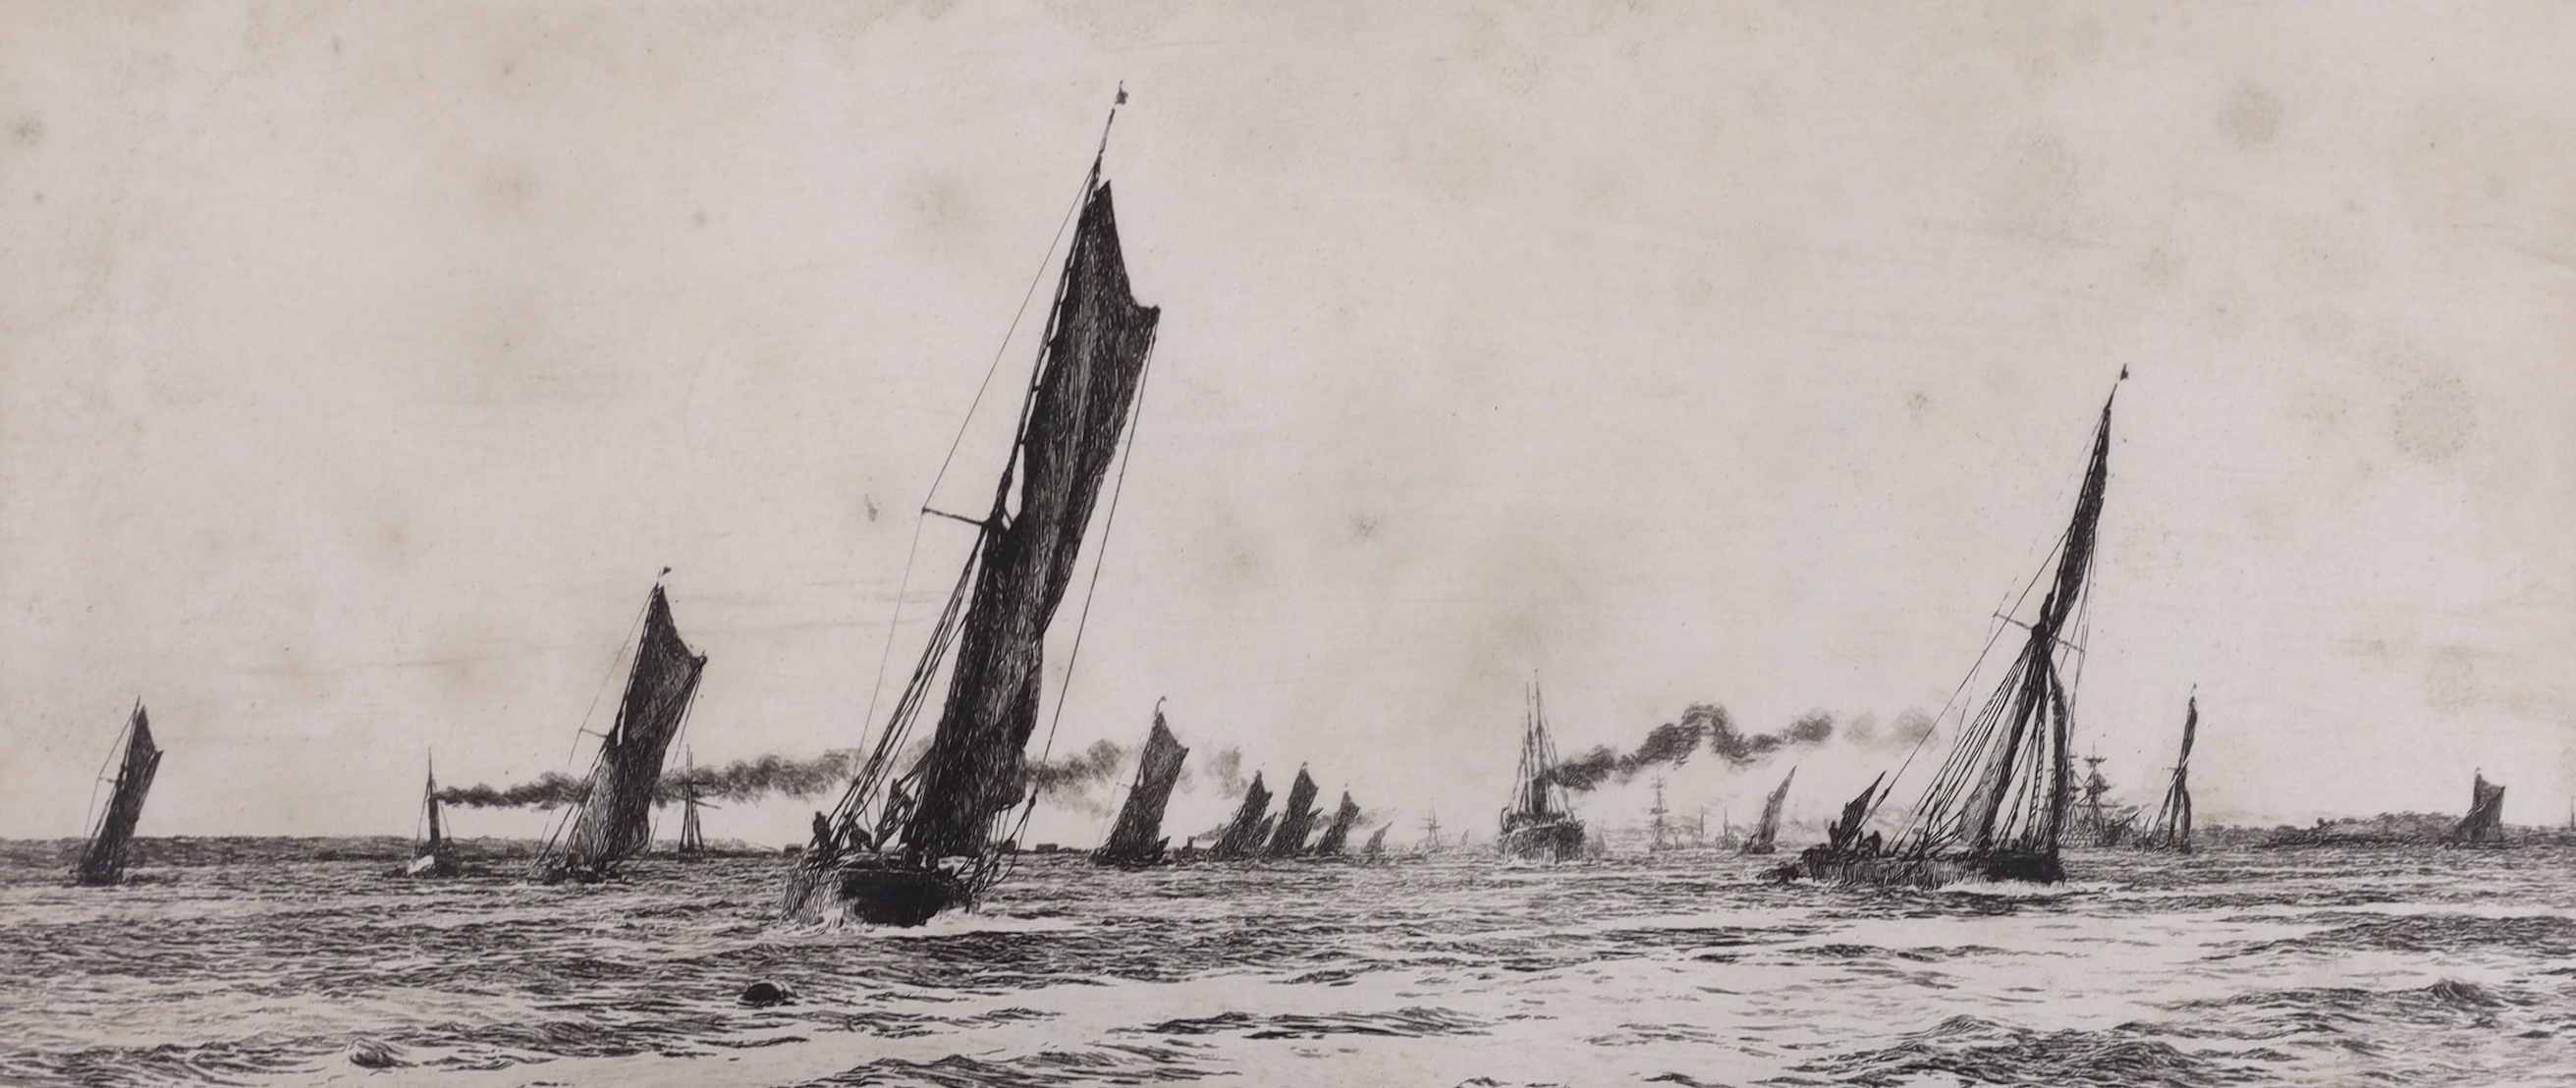 William Lionel Wyllie RA (1851-1931), etching, ‘A Fair Wind and an Ebb Tide’, signed in pencil, inscribed gallery label verso, 16 x 34cm